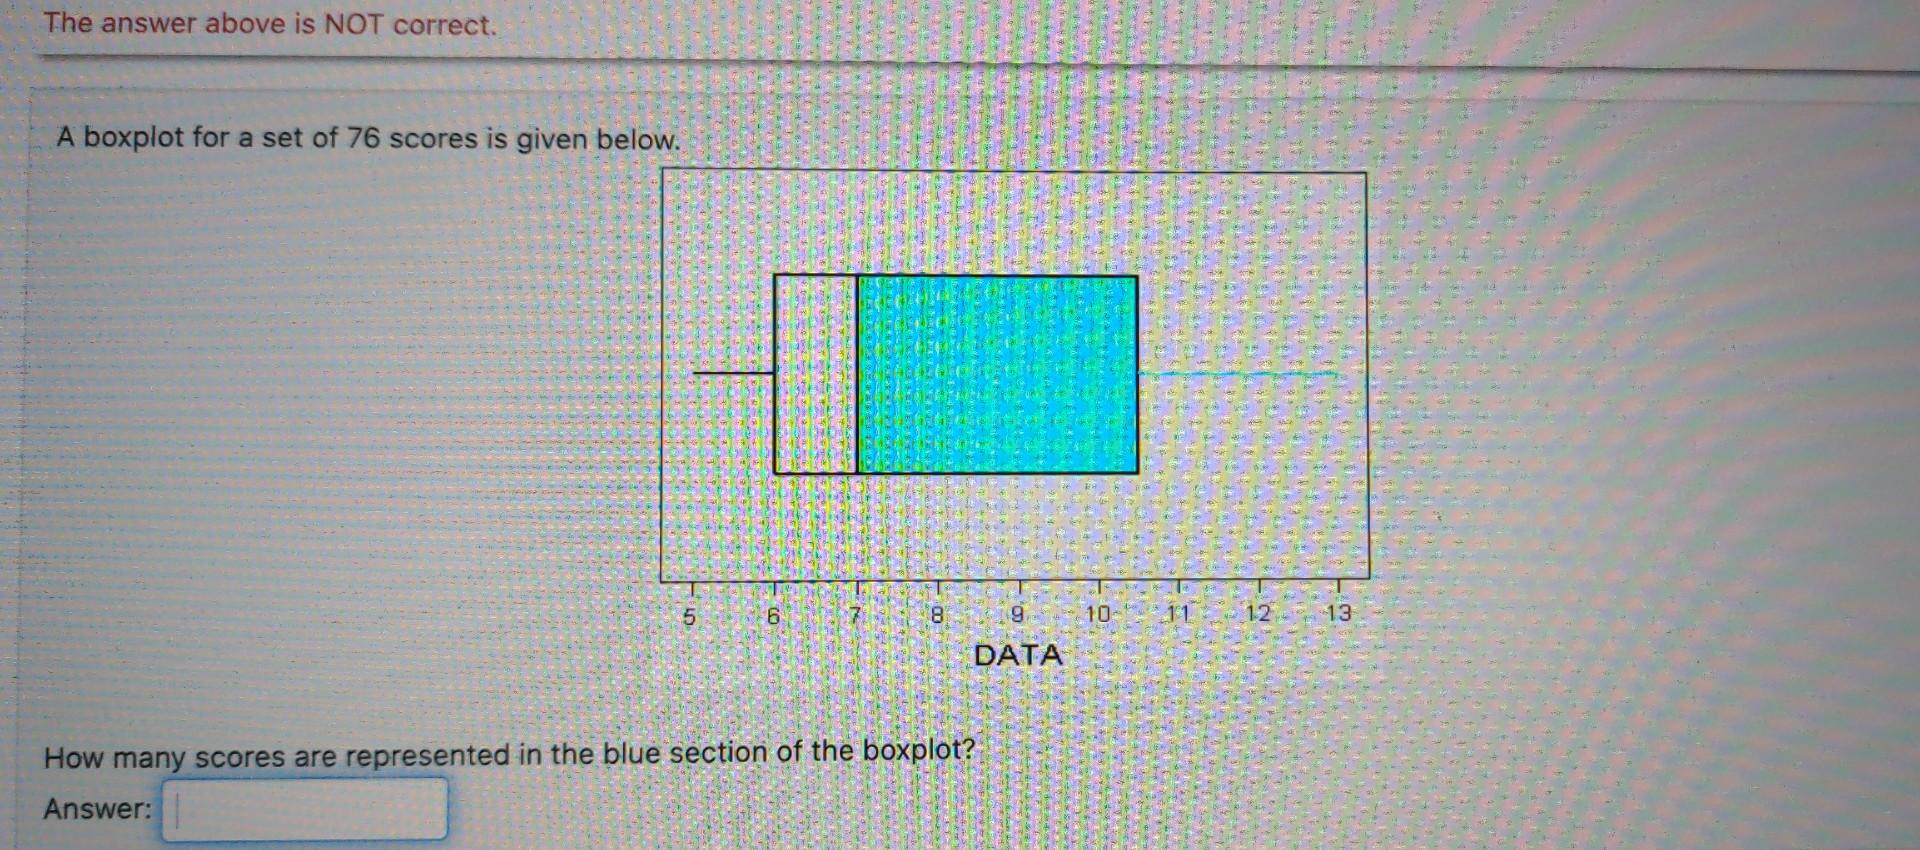 A boxplot for a set of 76 scores is given below.
How many scores are represented in the blue section of the boxplot?
Answer: